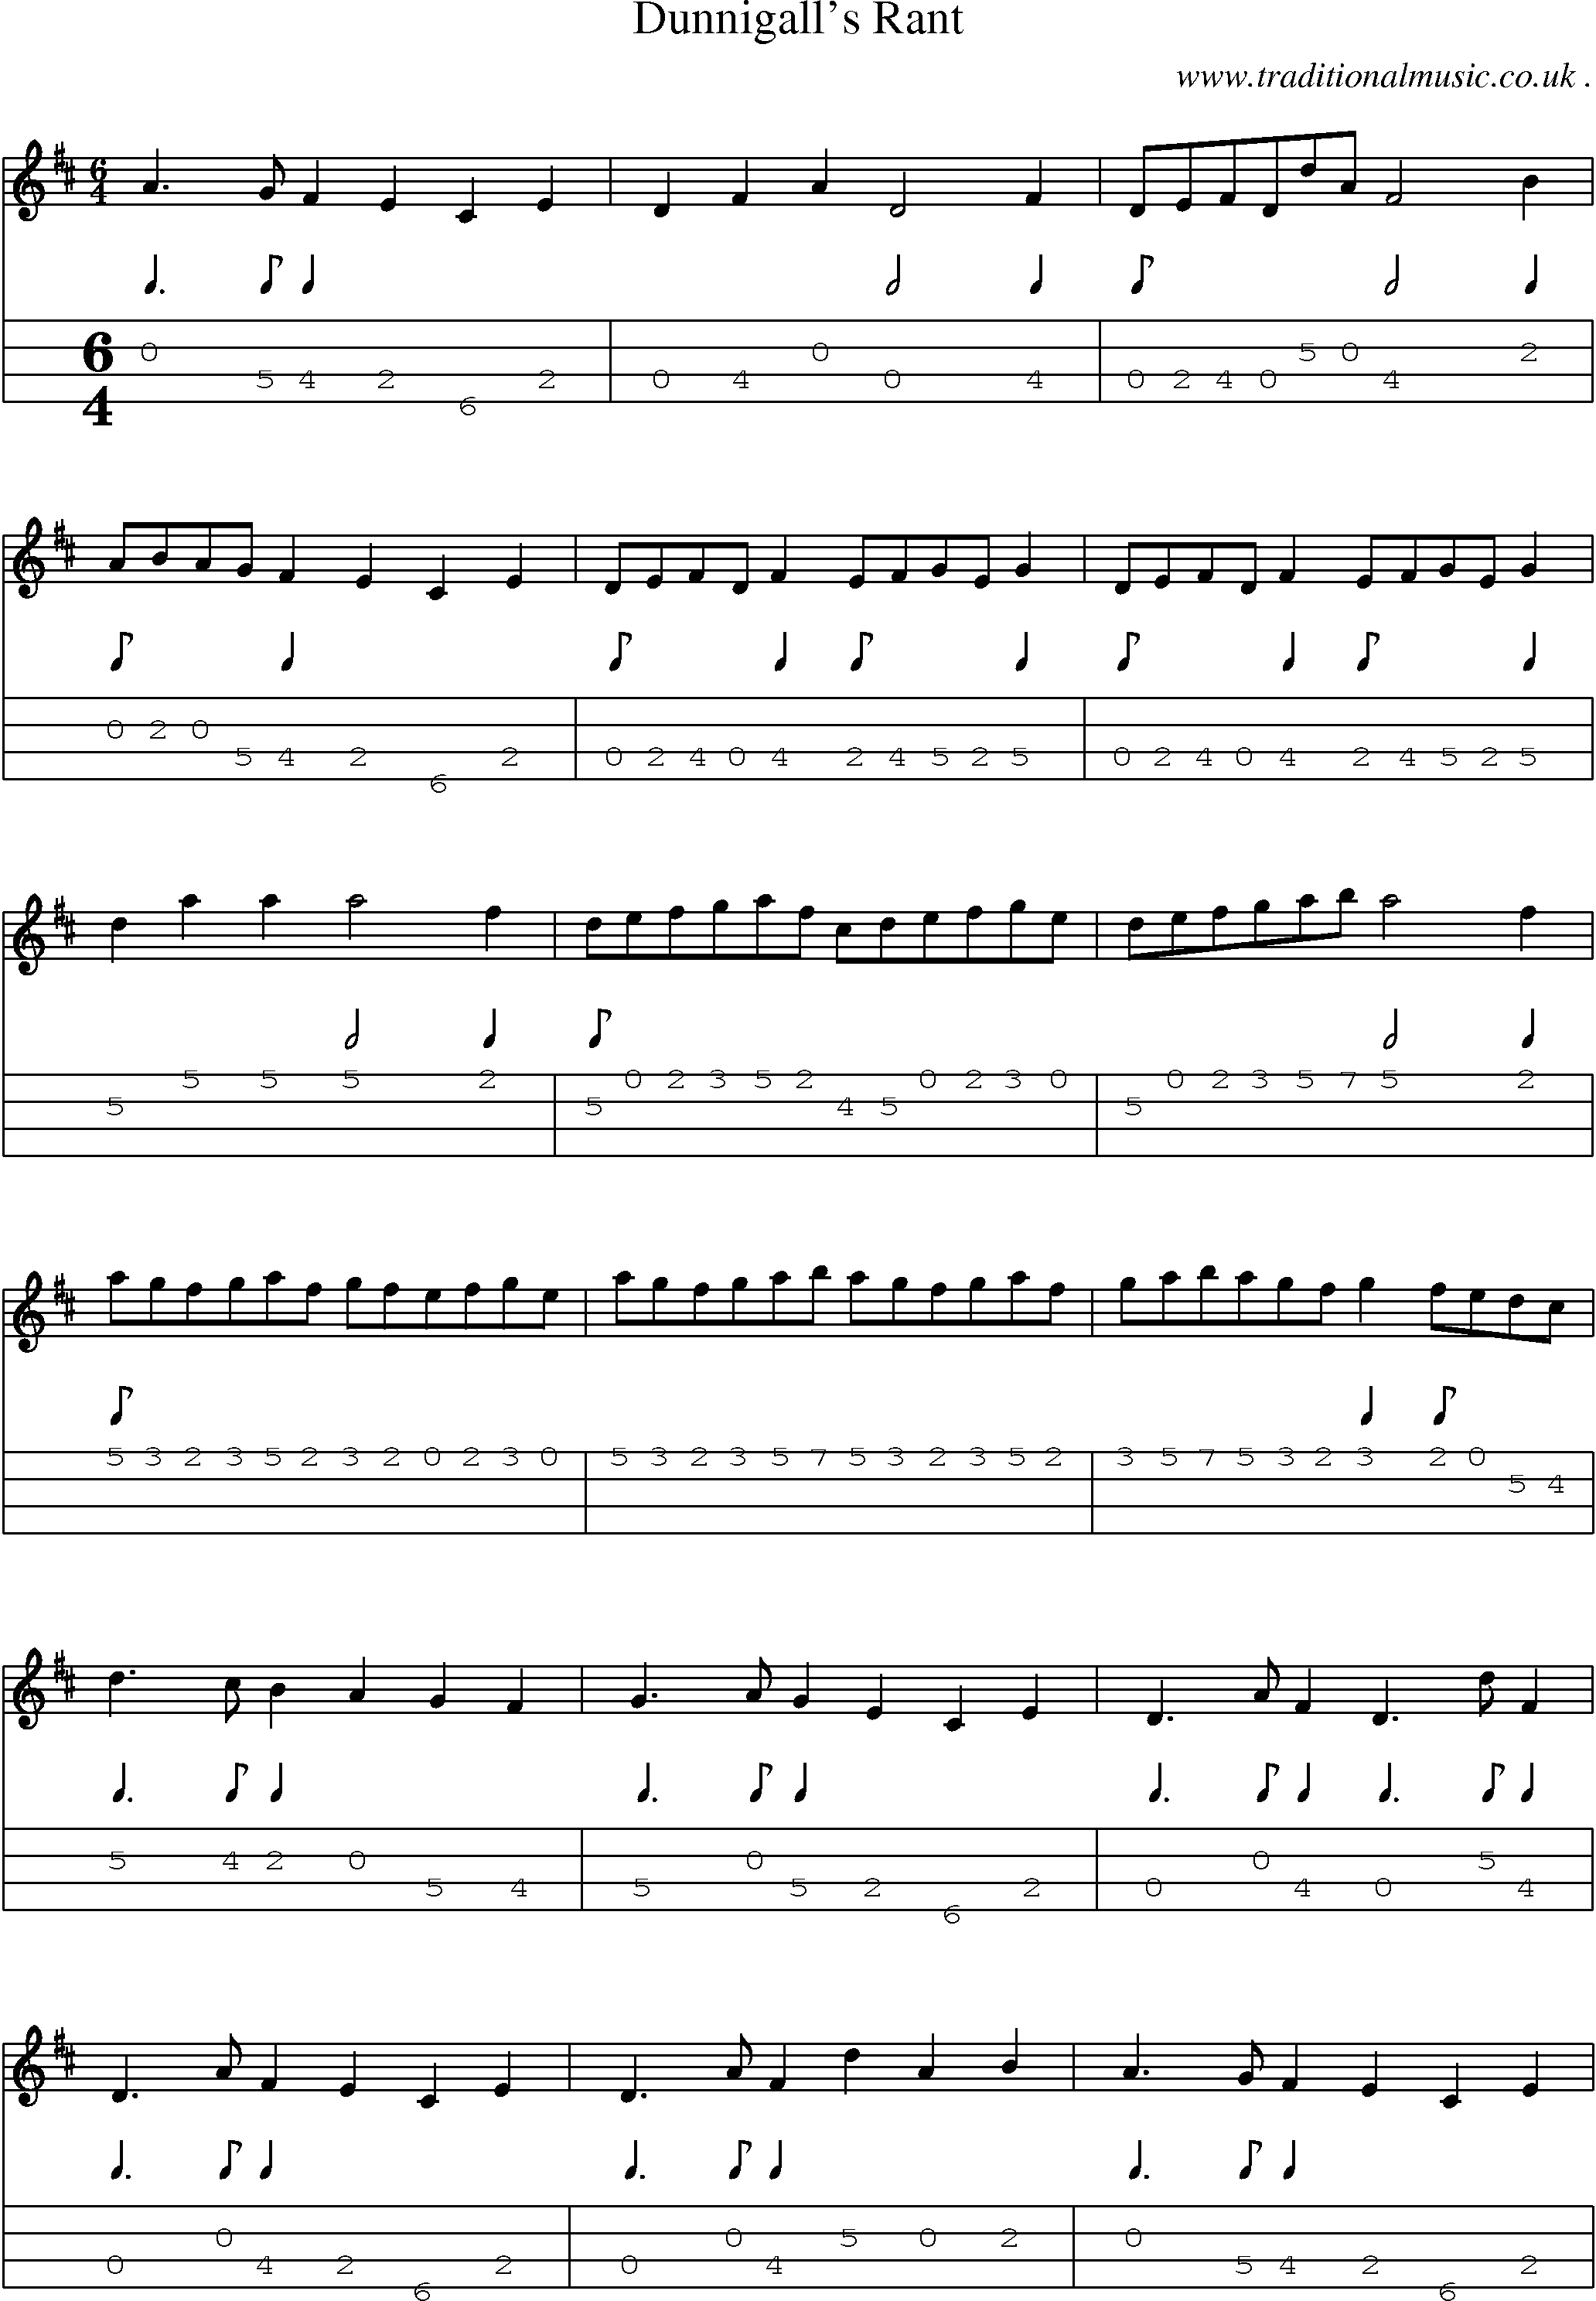 Sheet-music  score, Chords and Mandolin Tabs for Dunnigalls Rant